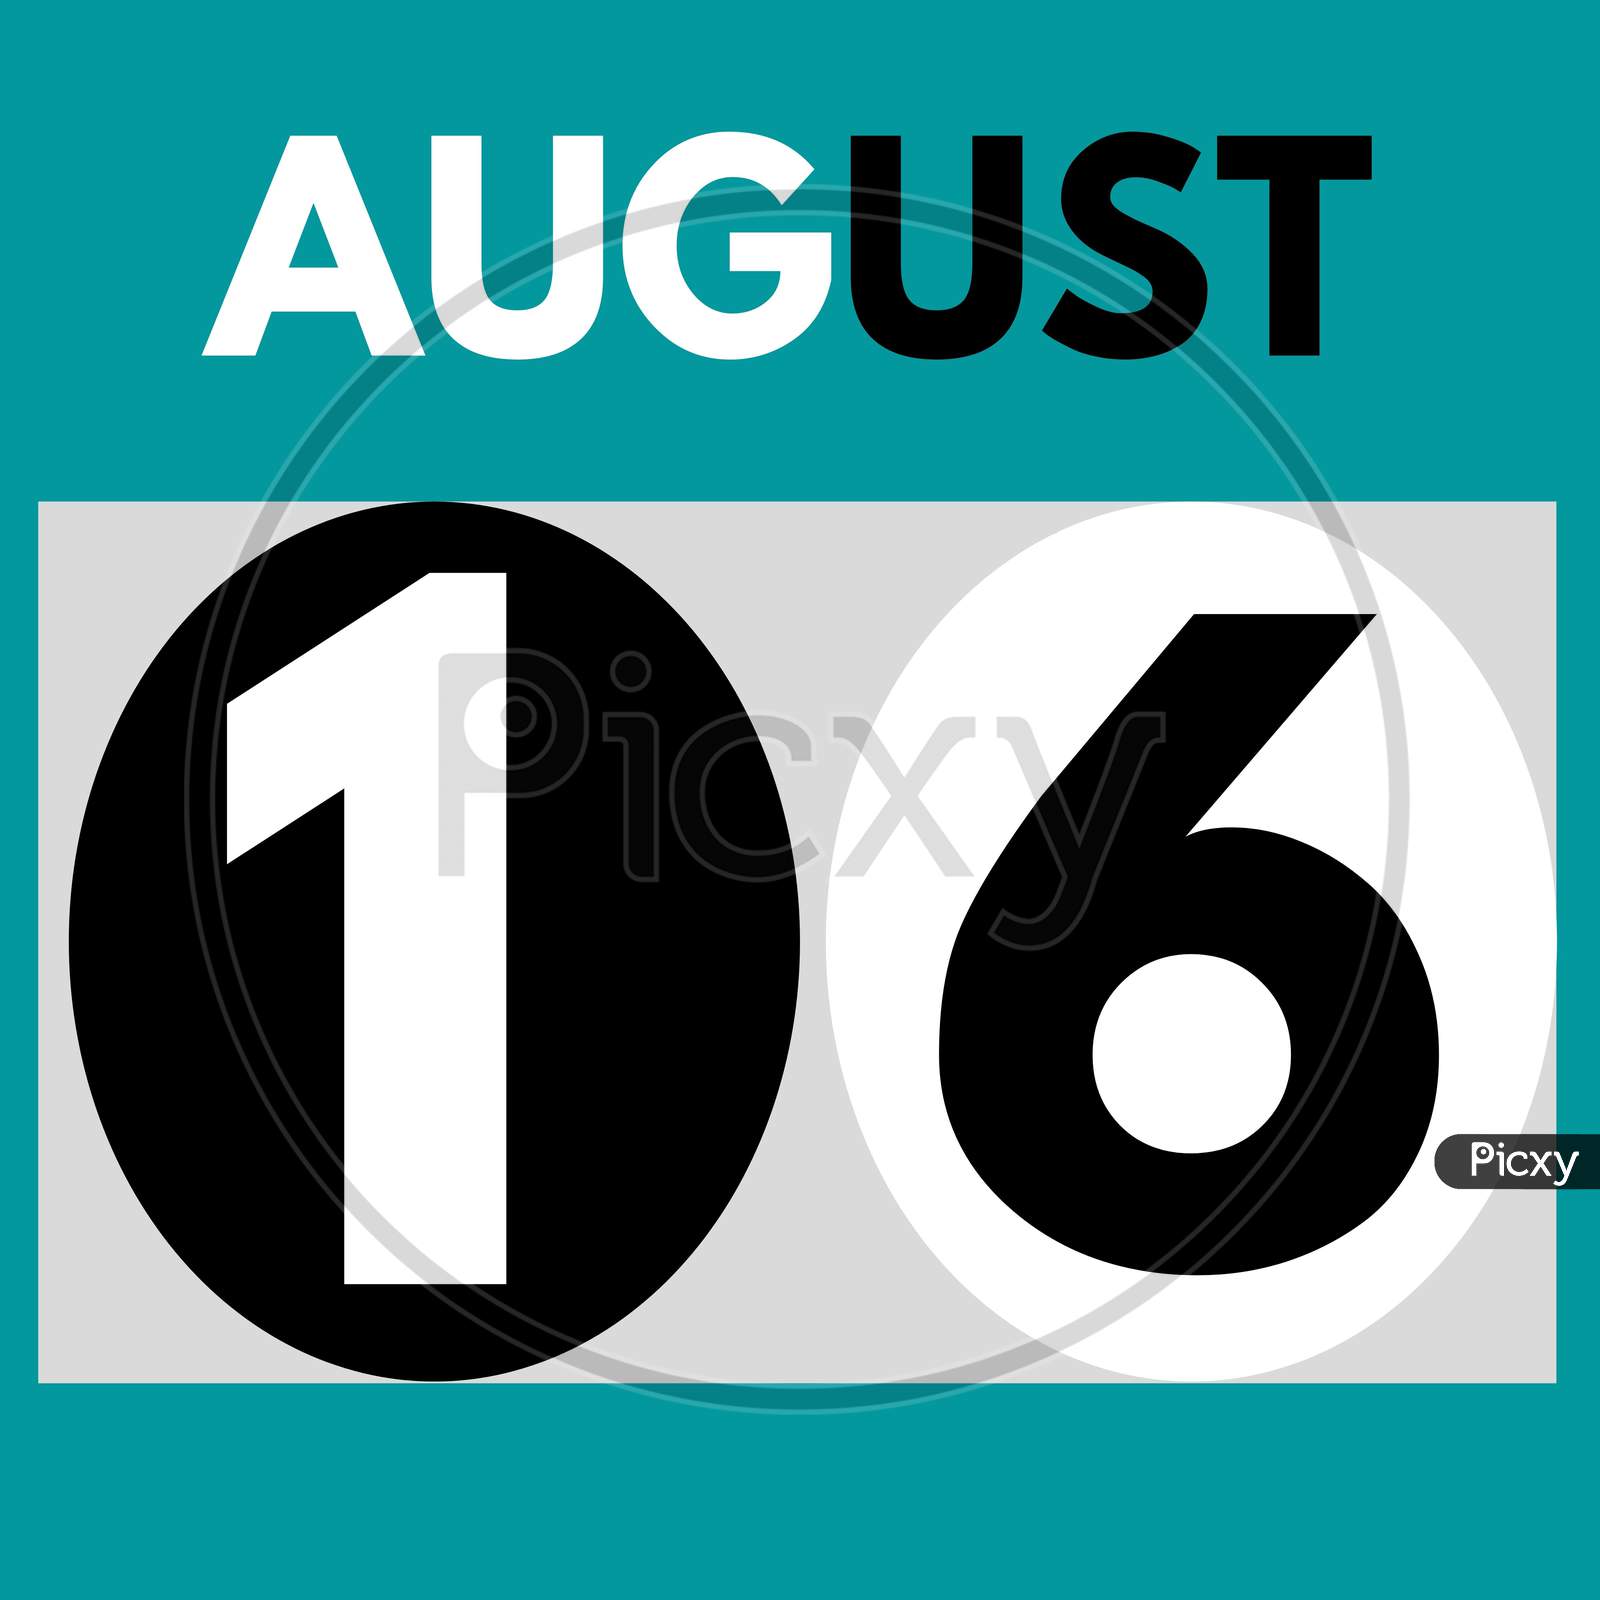 August 16 . Modern Daily Calendar Icon .Date ,Day, Month .Calendar For The Month Of August